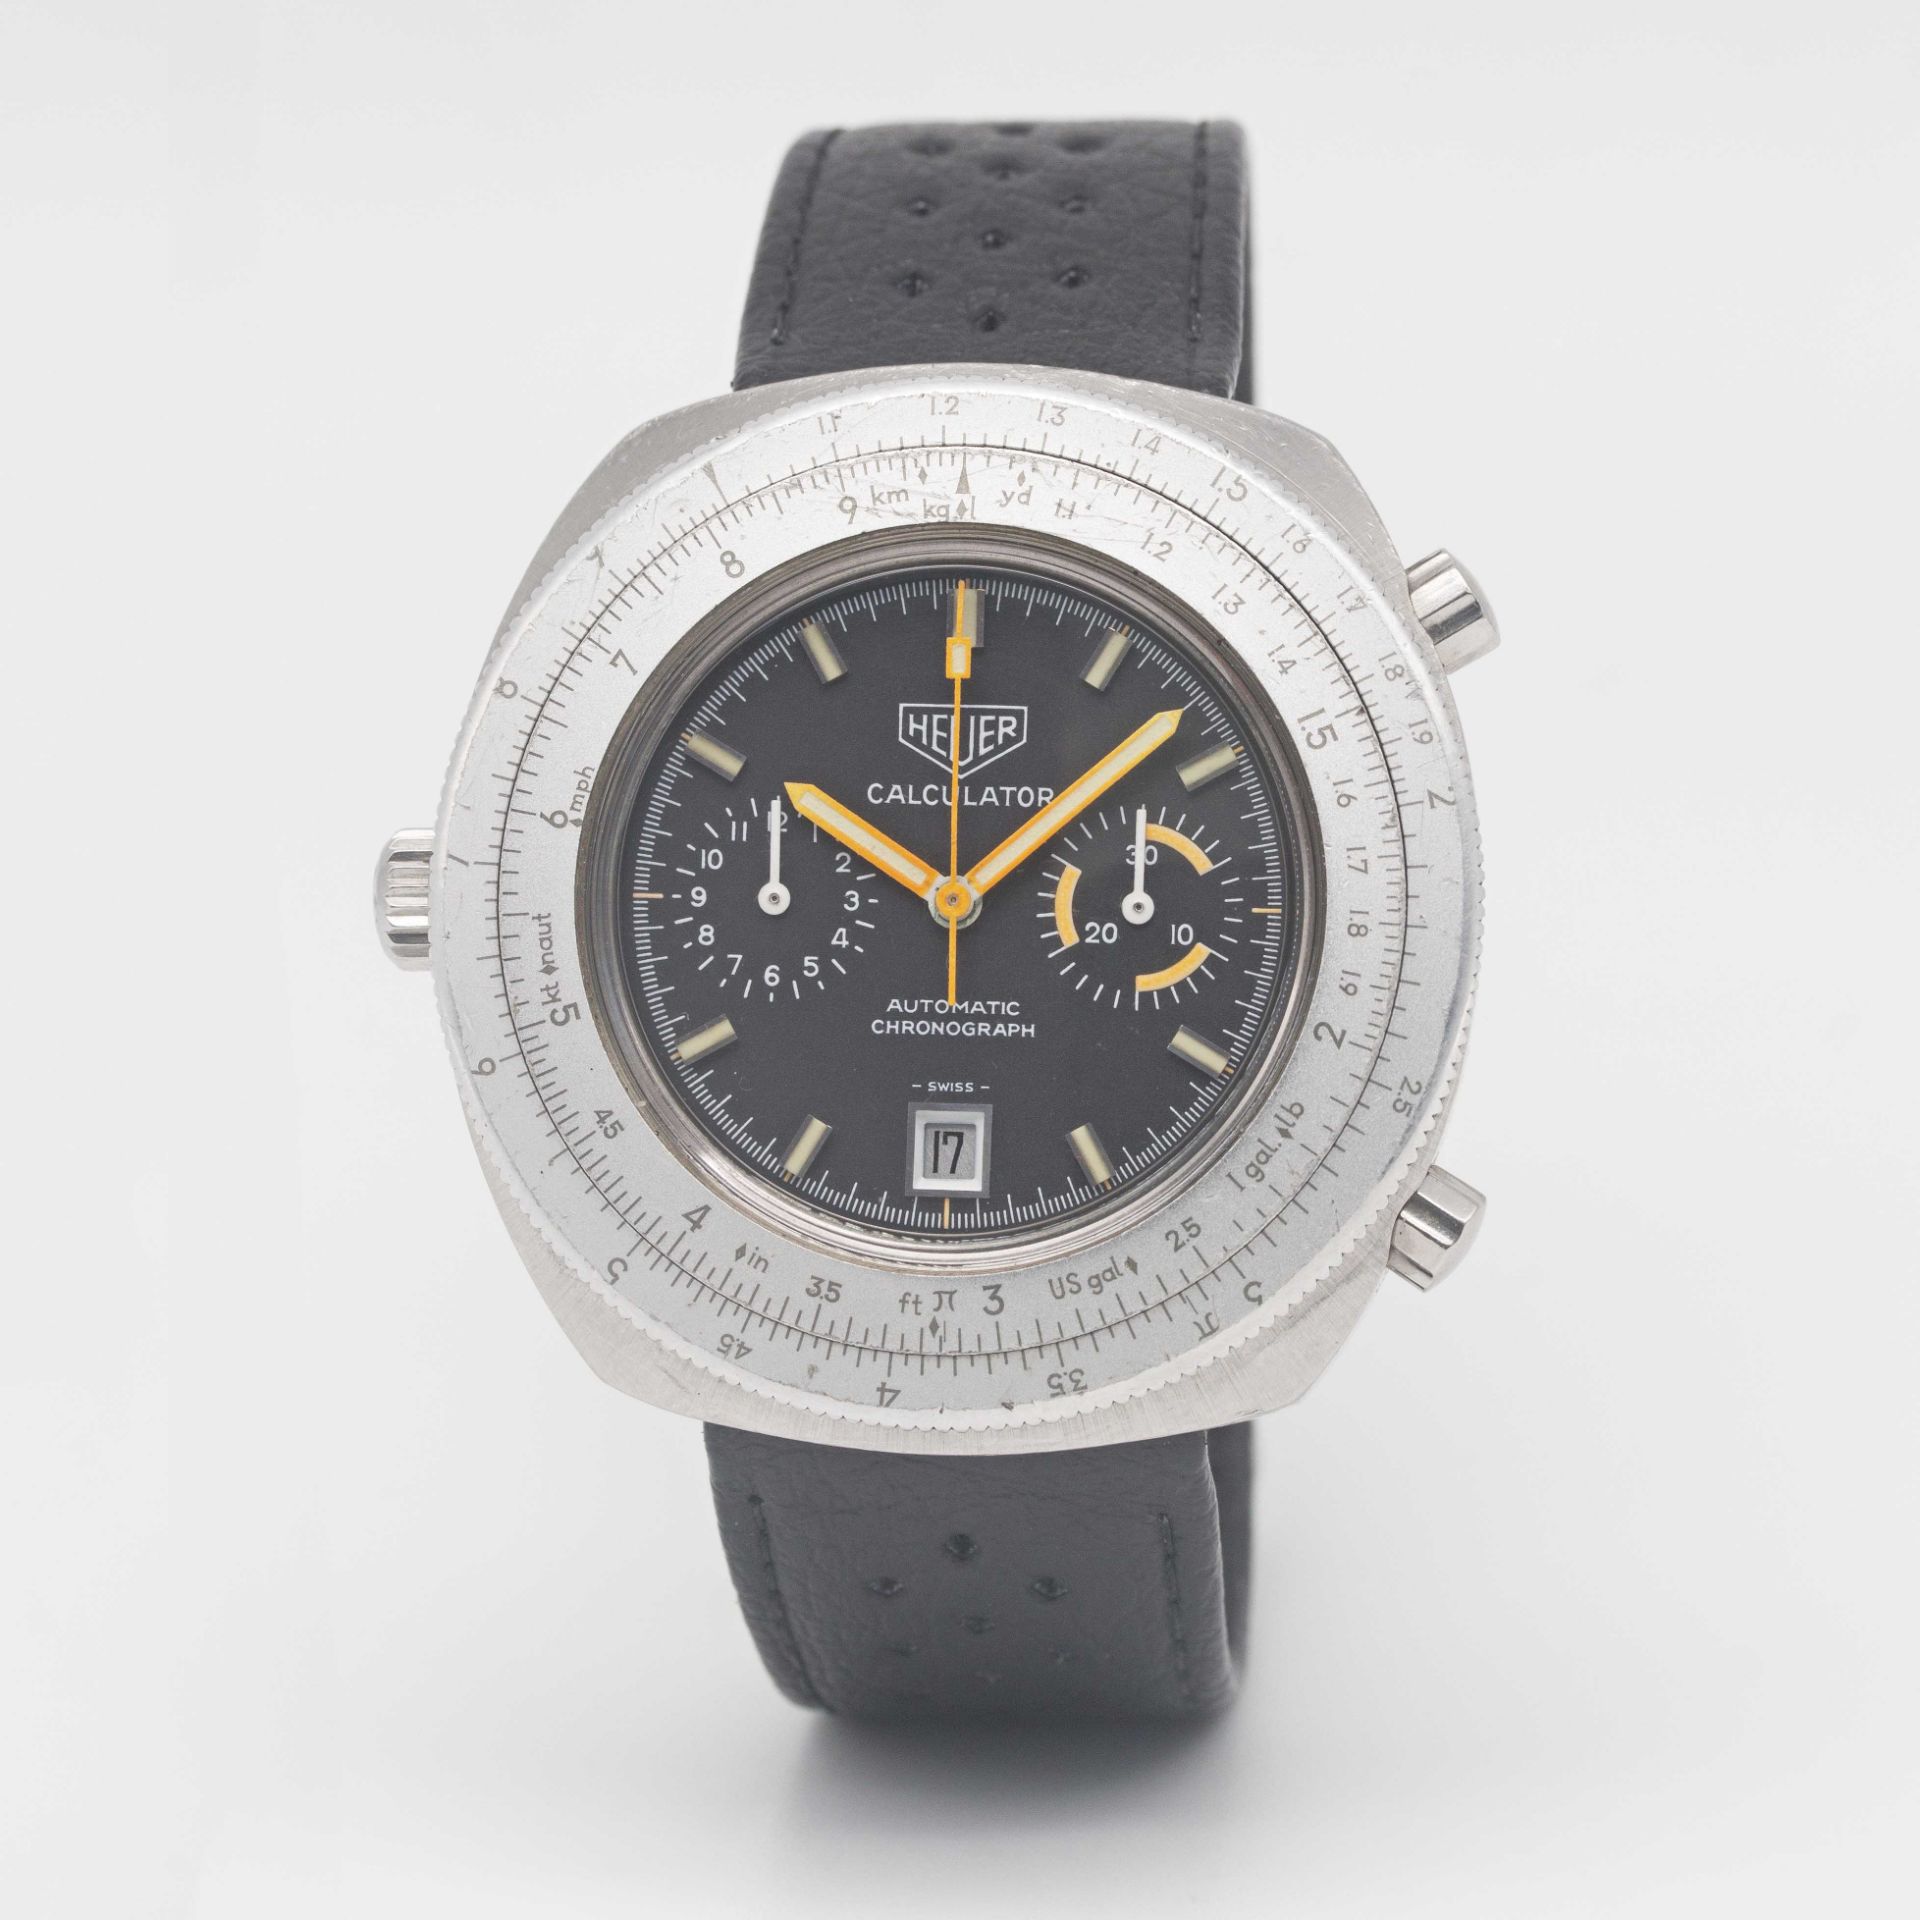 A GENTLEMAN'S STAINLESS STEEL HEUER CALCULATOR AUTOMATIC CHRONOGRAPH WRIST WATCH CIRCA 1970s, REF. - Image 4 of 8